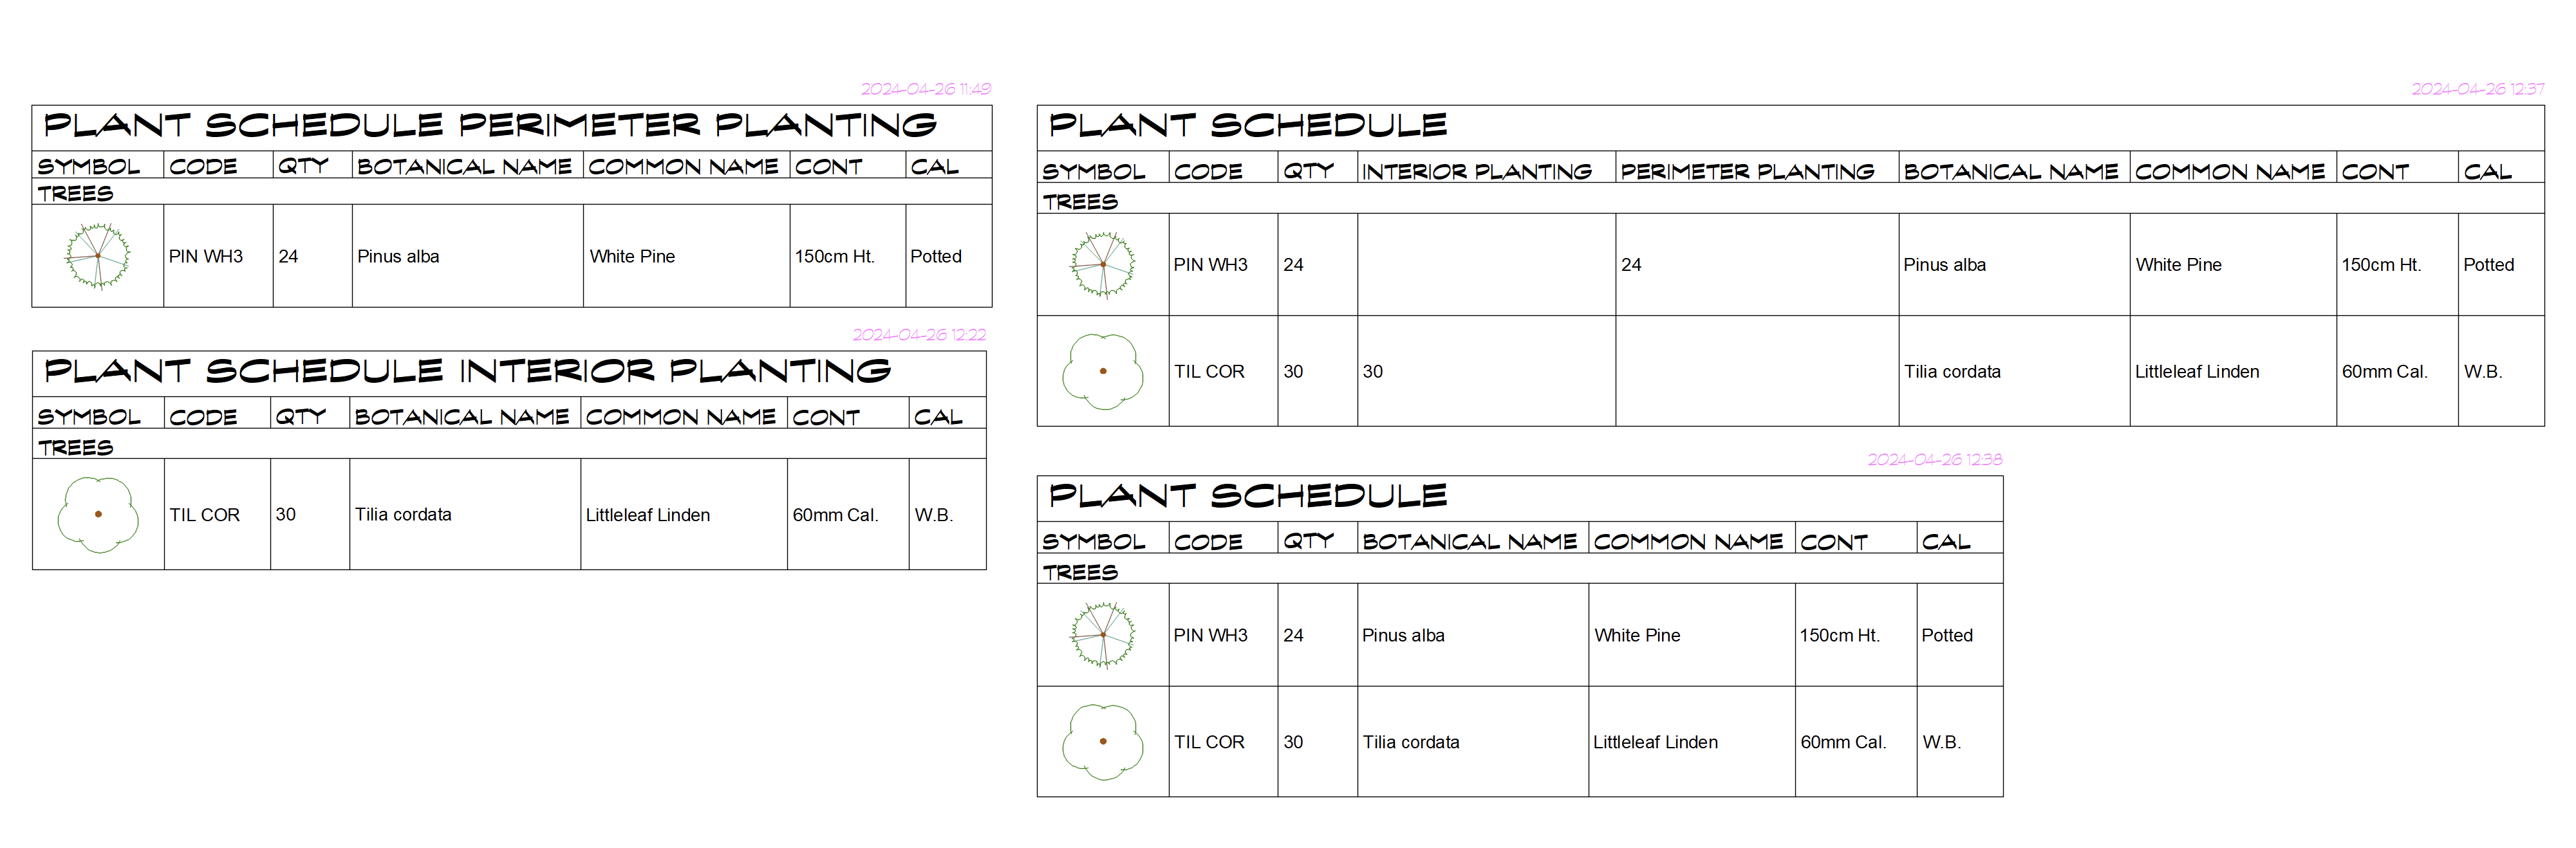 Example Plant Schedules based on All Work Areas, the Entire drawing, and limited to specific Work Areas